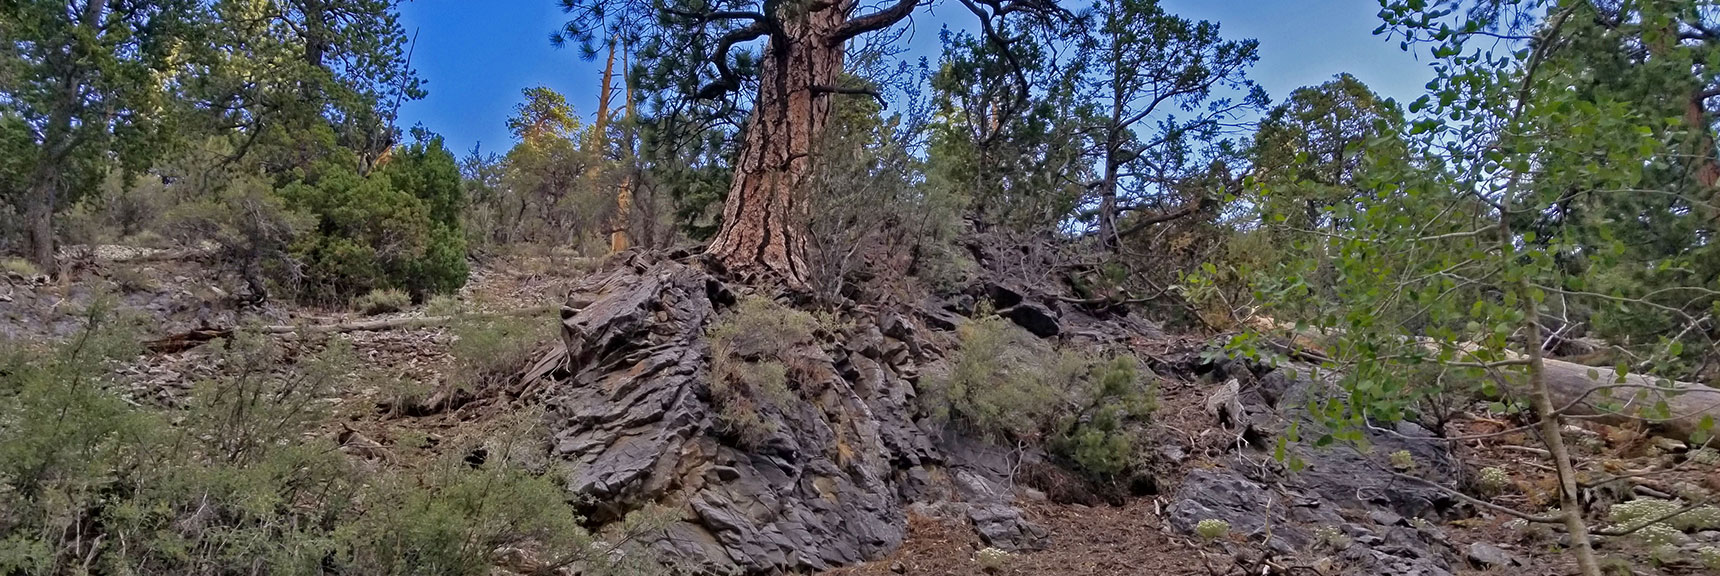 This Tree Apparently Growing Out of a Solid Rock! | The Sisters South | Lee Canyon | Mt Charleston Wilderness | Spring Mountains, Nevada